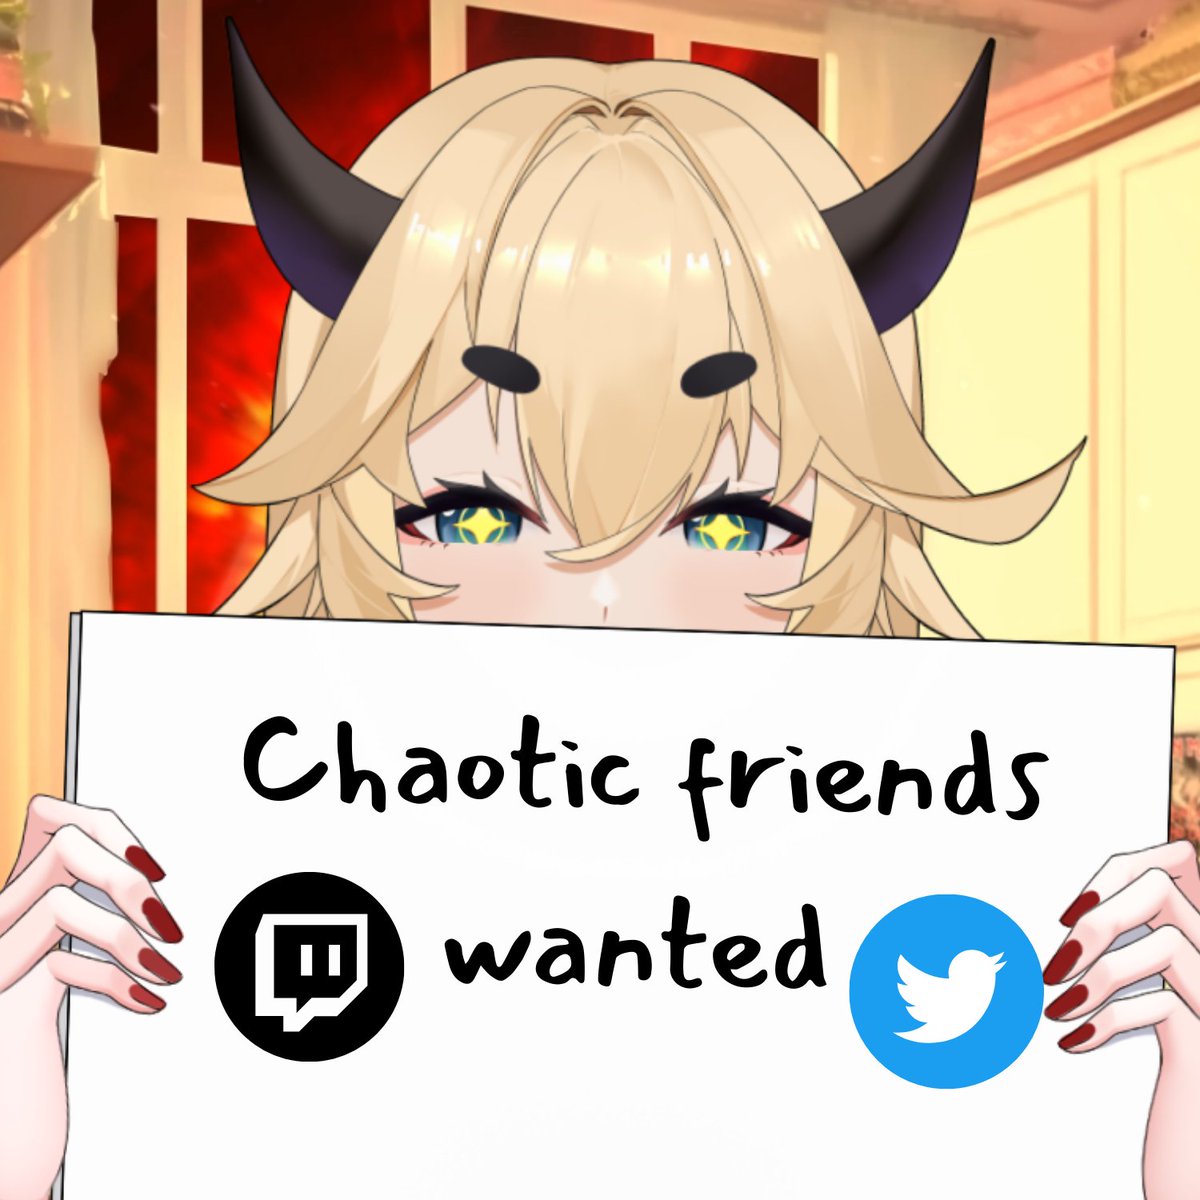 🚨 Attention awesome mortals! 🚨 Looking for some  Twitch streams to raid and spread the love! Drop your Twitch links below or tag your favorite streamers who deserve a raid party 🎉 Let's make some chaos happen! 🔥 #vtuber #vtuberen #TwitchRaid #VTUBERSUPPORTCHAIN